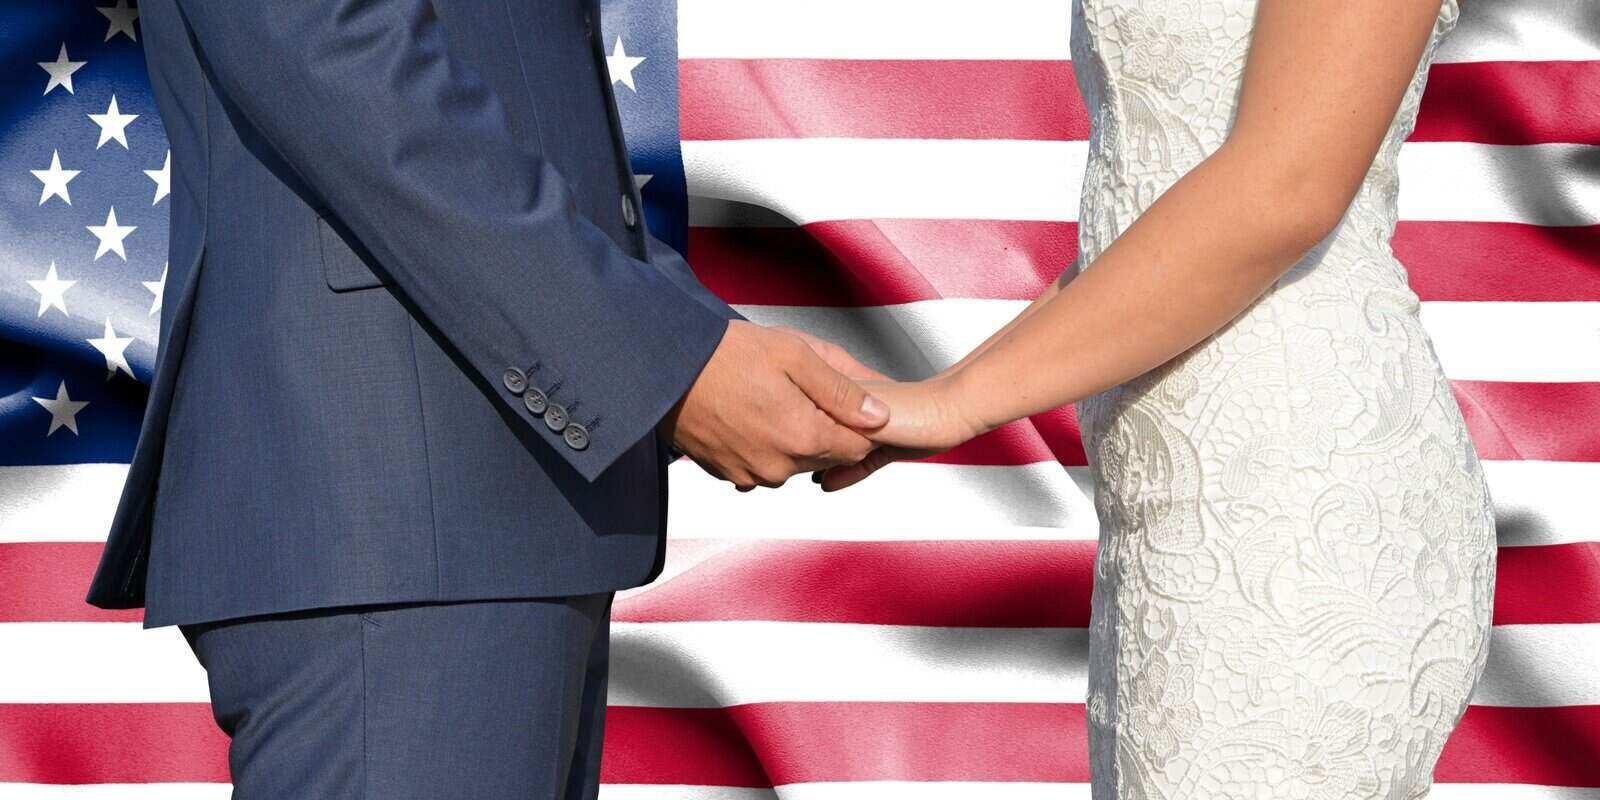 husband and wife holding hands